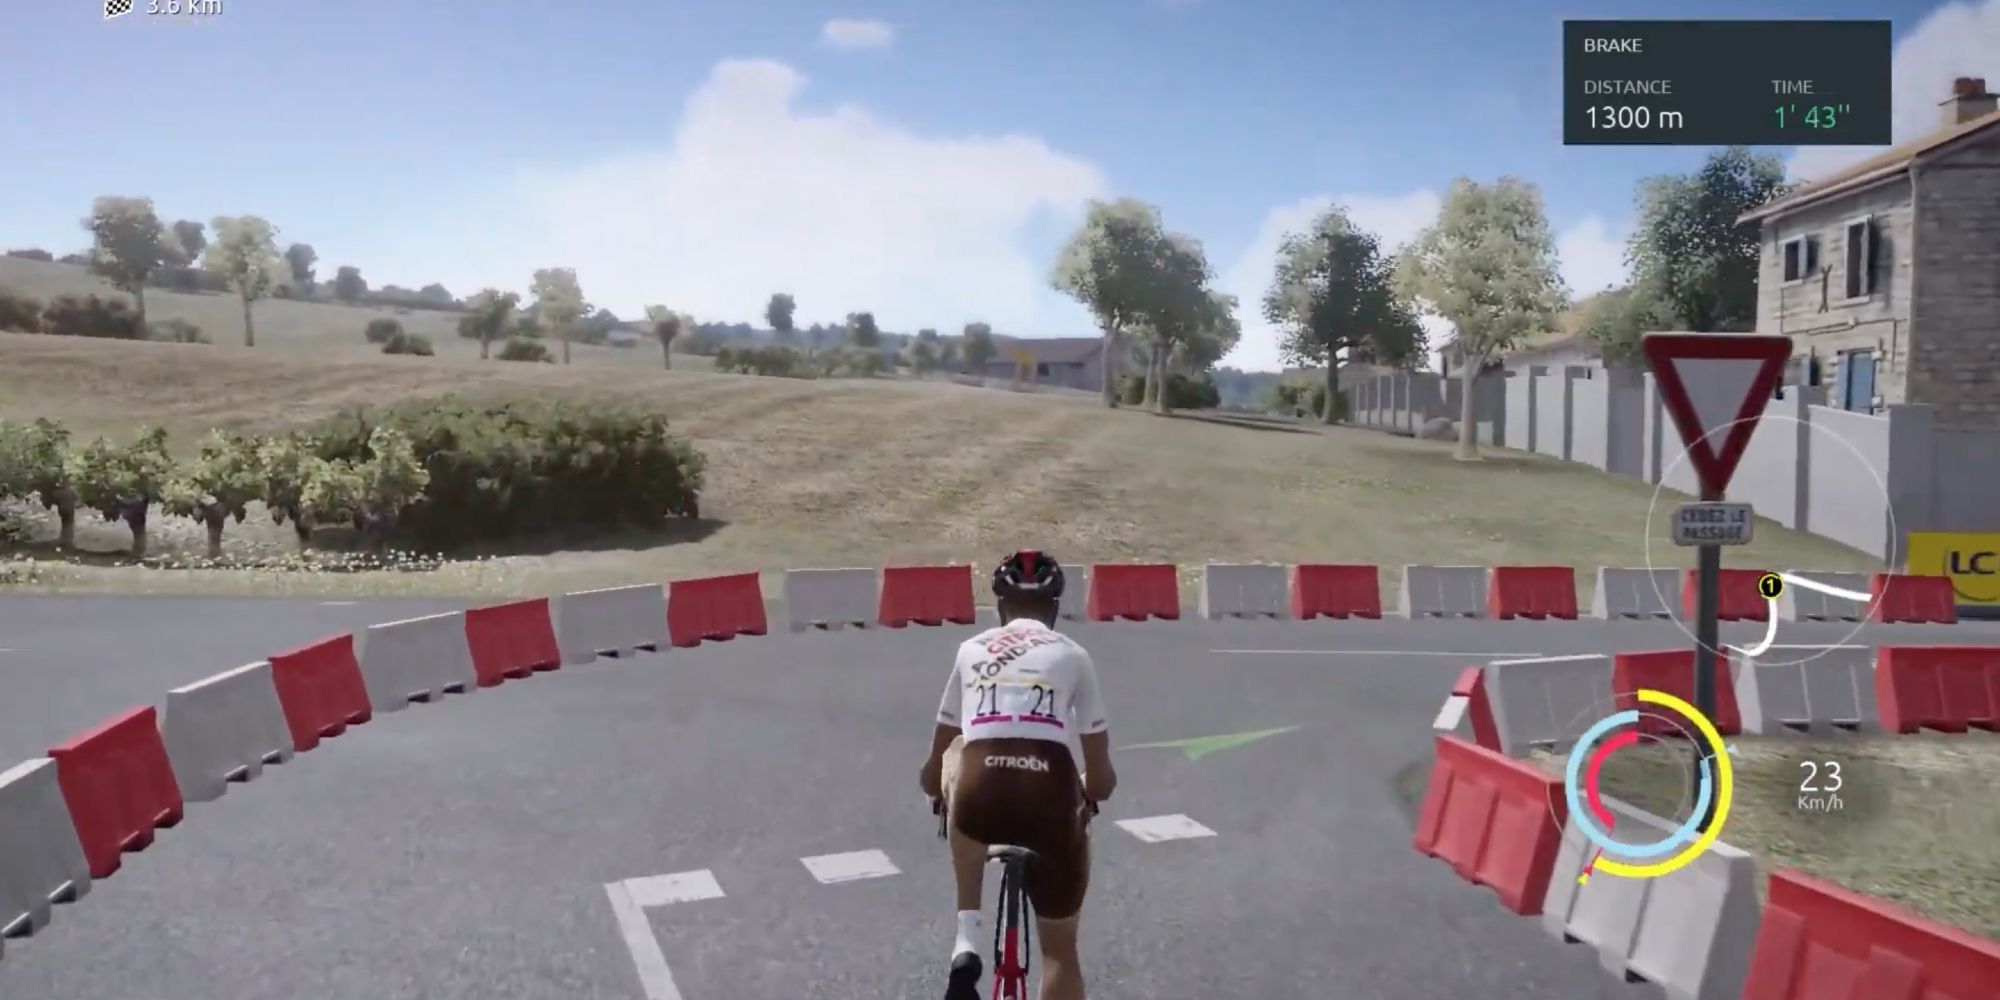 Tour de France 2022 - Go through the tutorial - Player learns to pedal in tutorial mode